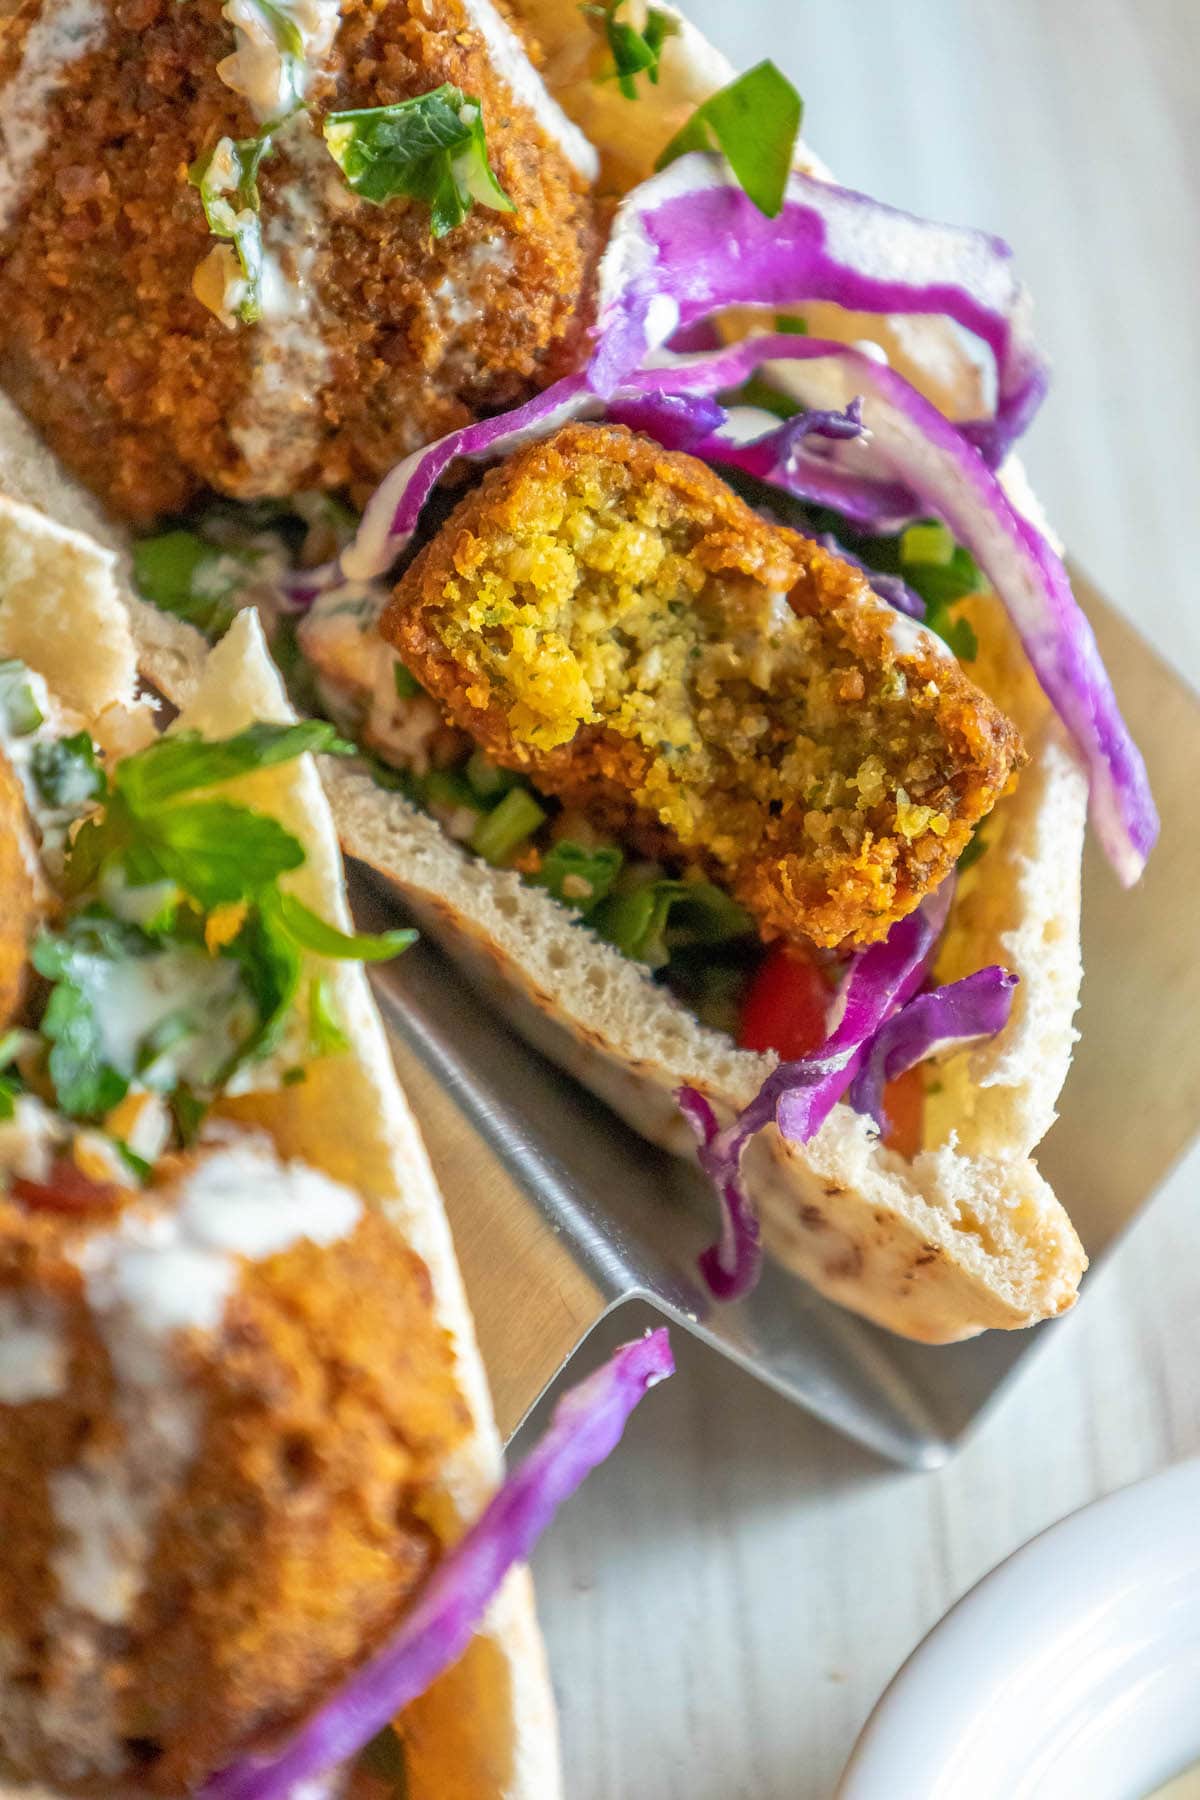 pita stuffed with falafel balls, cabbage, and salad with tahini sauce ladled on top